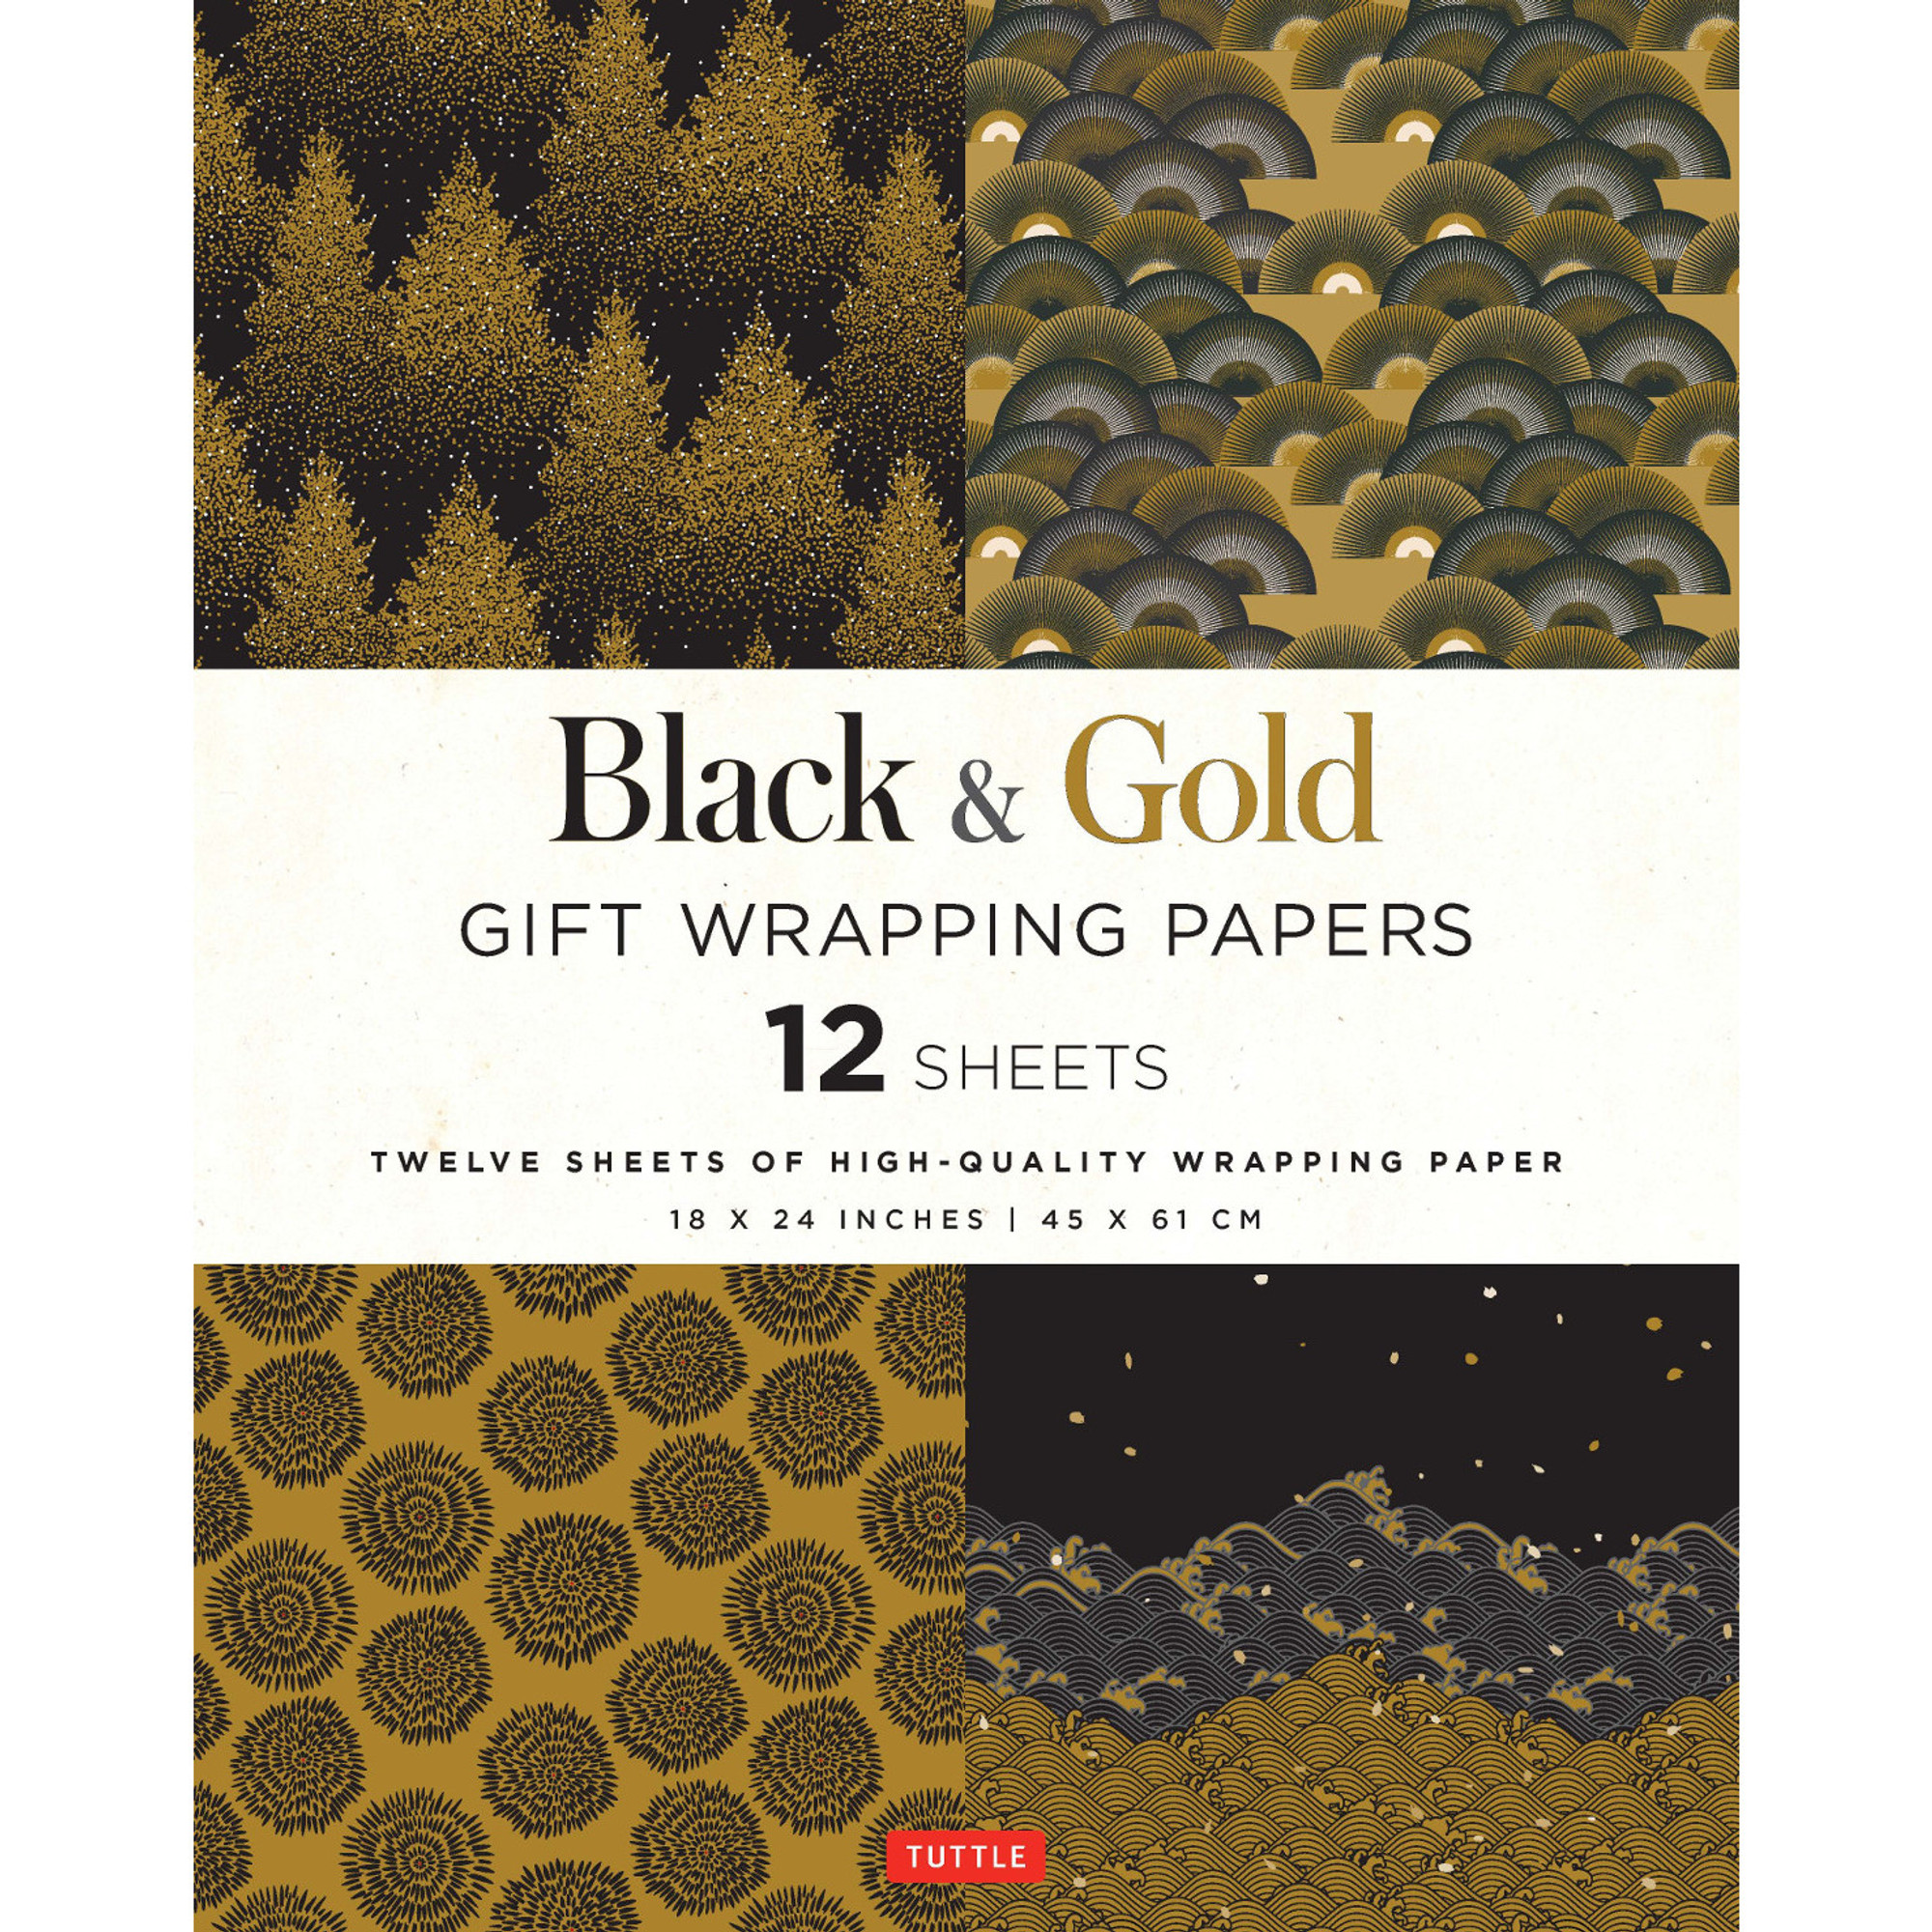 Black & Gold Gift Wrapping Papers - 12 Sheets (9780804852104)